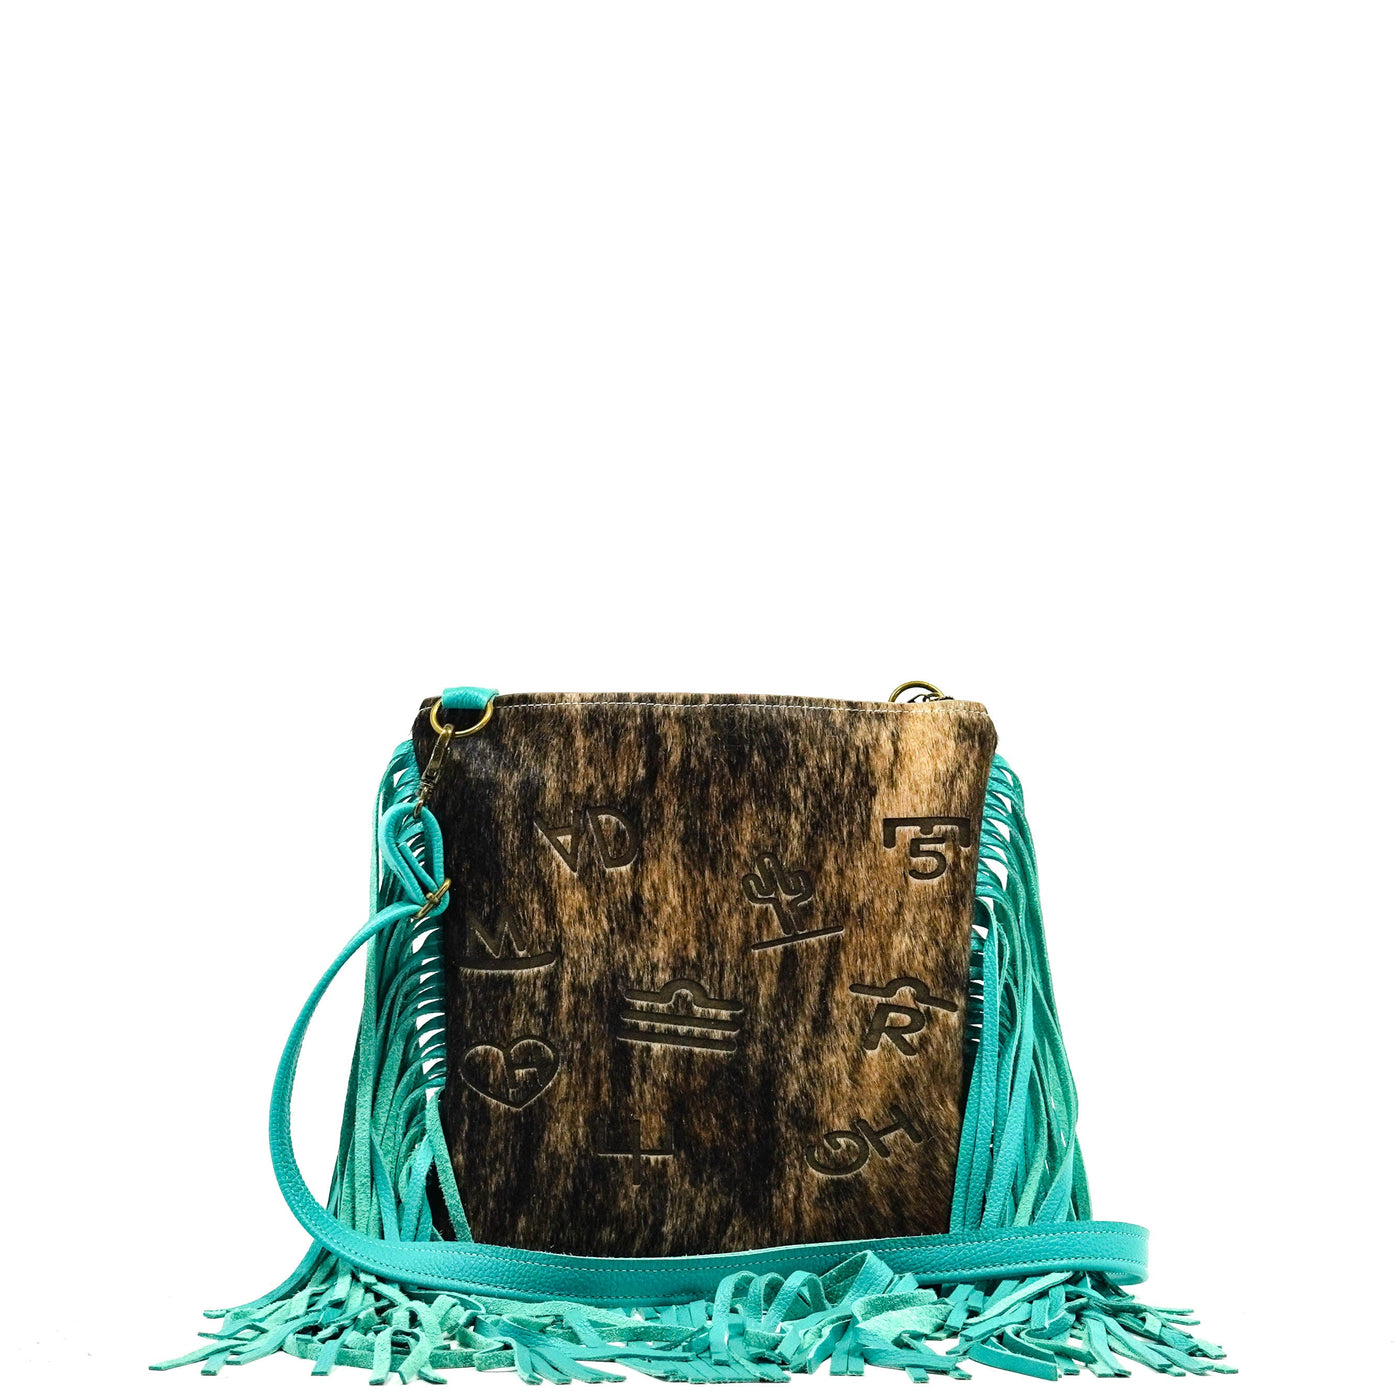 Shania - Two-Tone Brindle w/ No Embossed-Shania-Western-Cowhide-Bags-Handmade-Products-Gifts-Dancing Cactus Designs